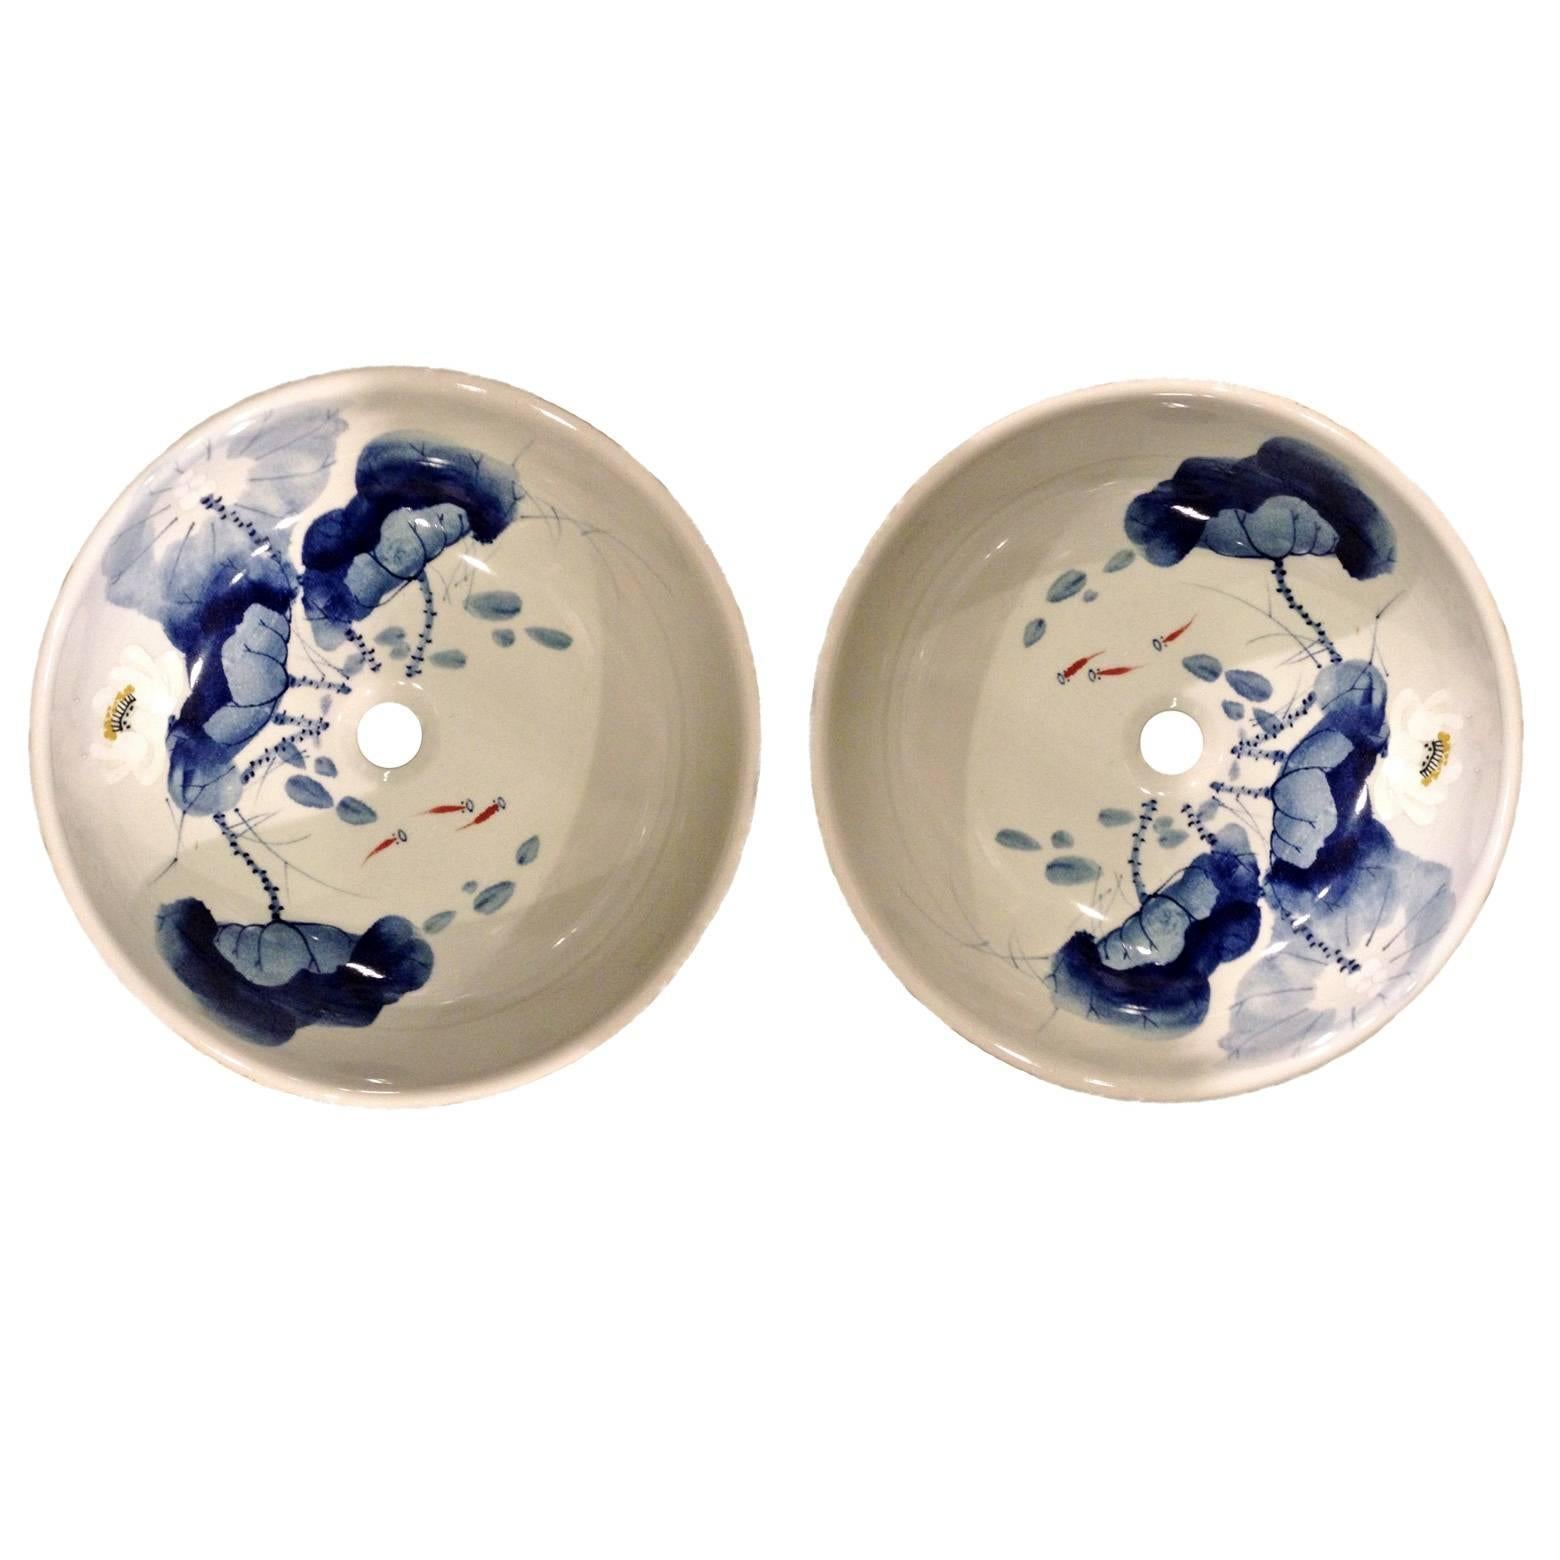 Pair of Blue and White Ceramic Sinks, Hand-Painted